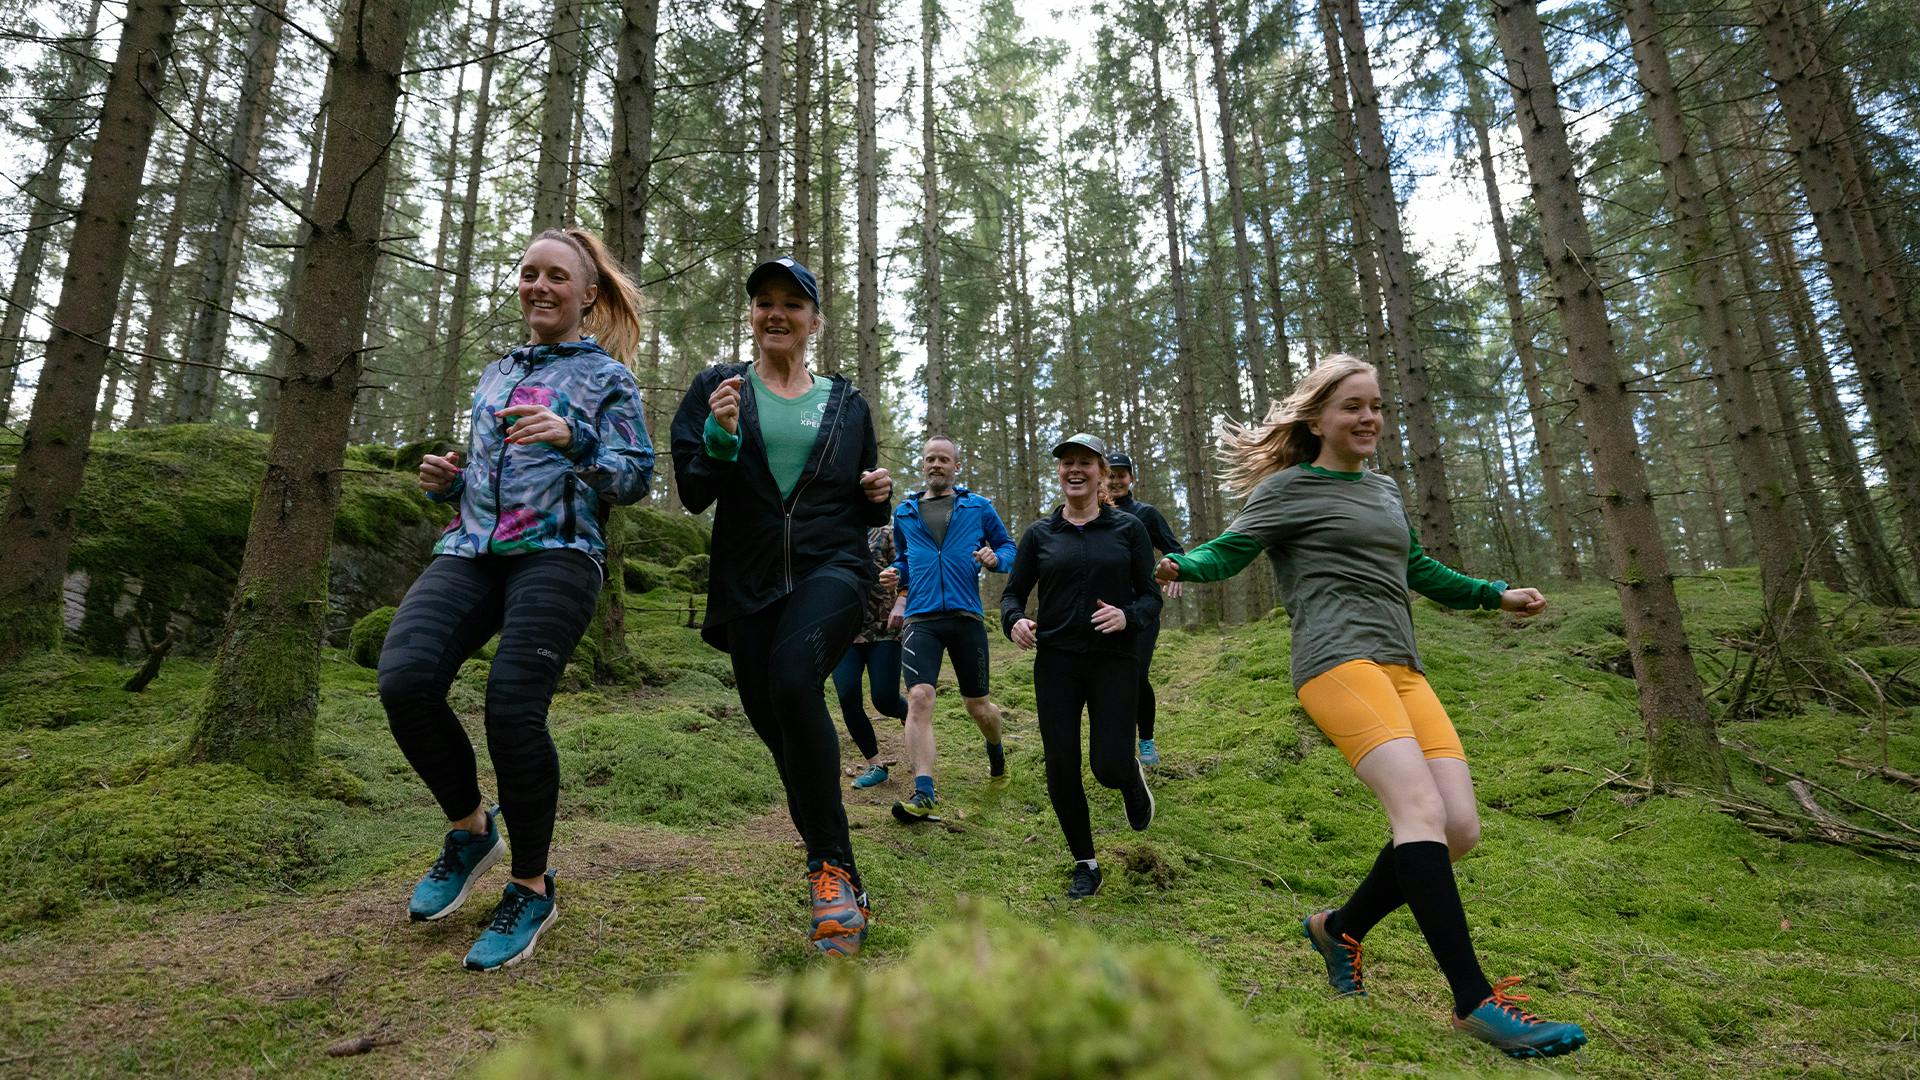 Icebug employees running downhill in the forest